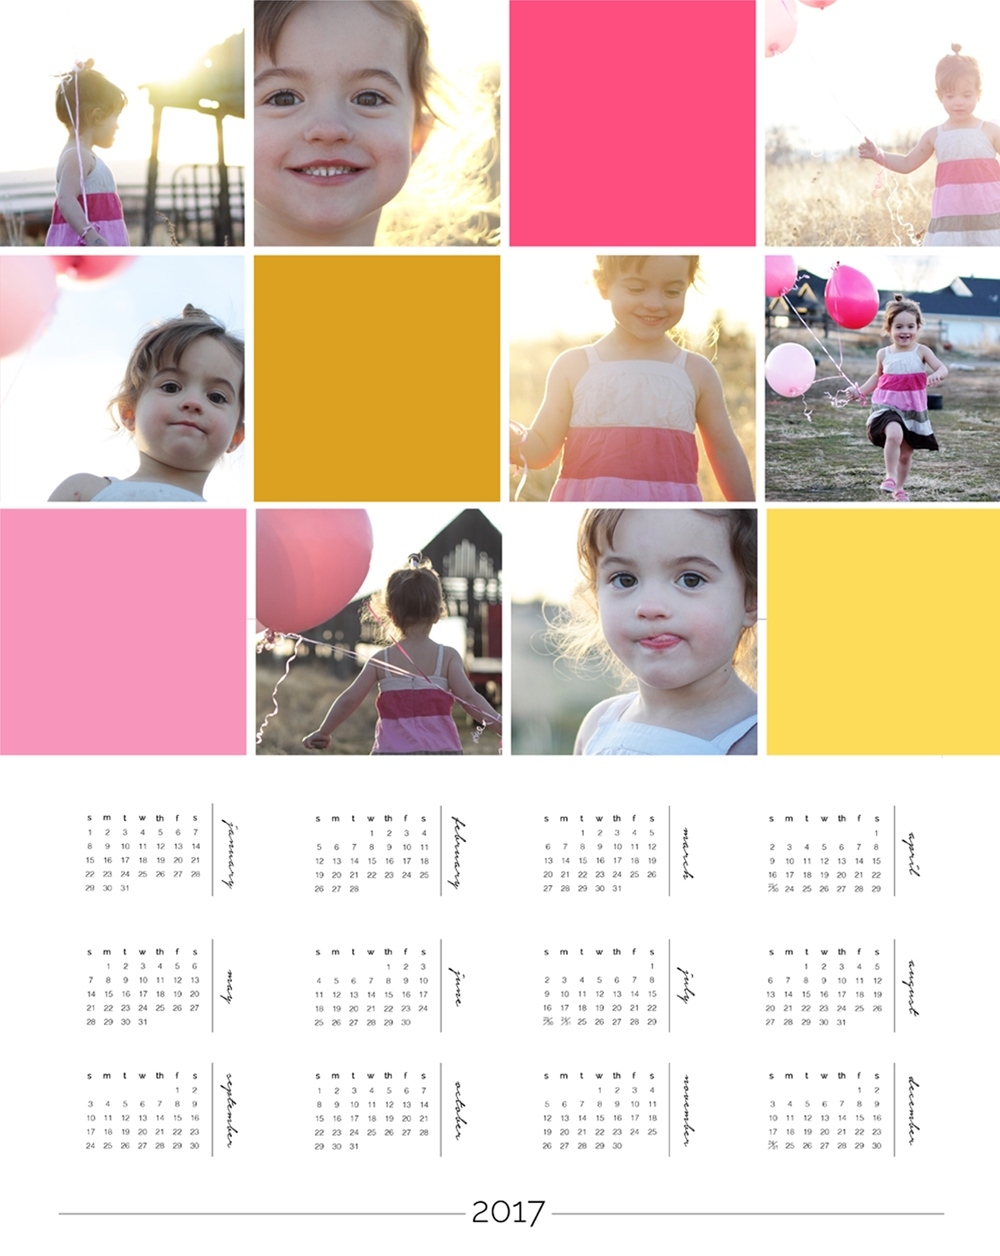 Make A Personalized Photo Wall Calendar + Photoshop Elements Perky Making A Calendar Template In Photoshop